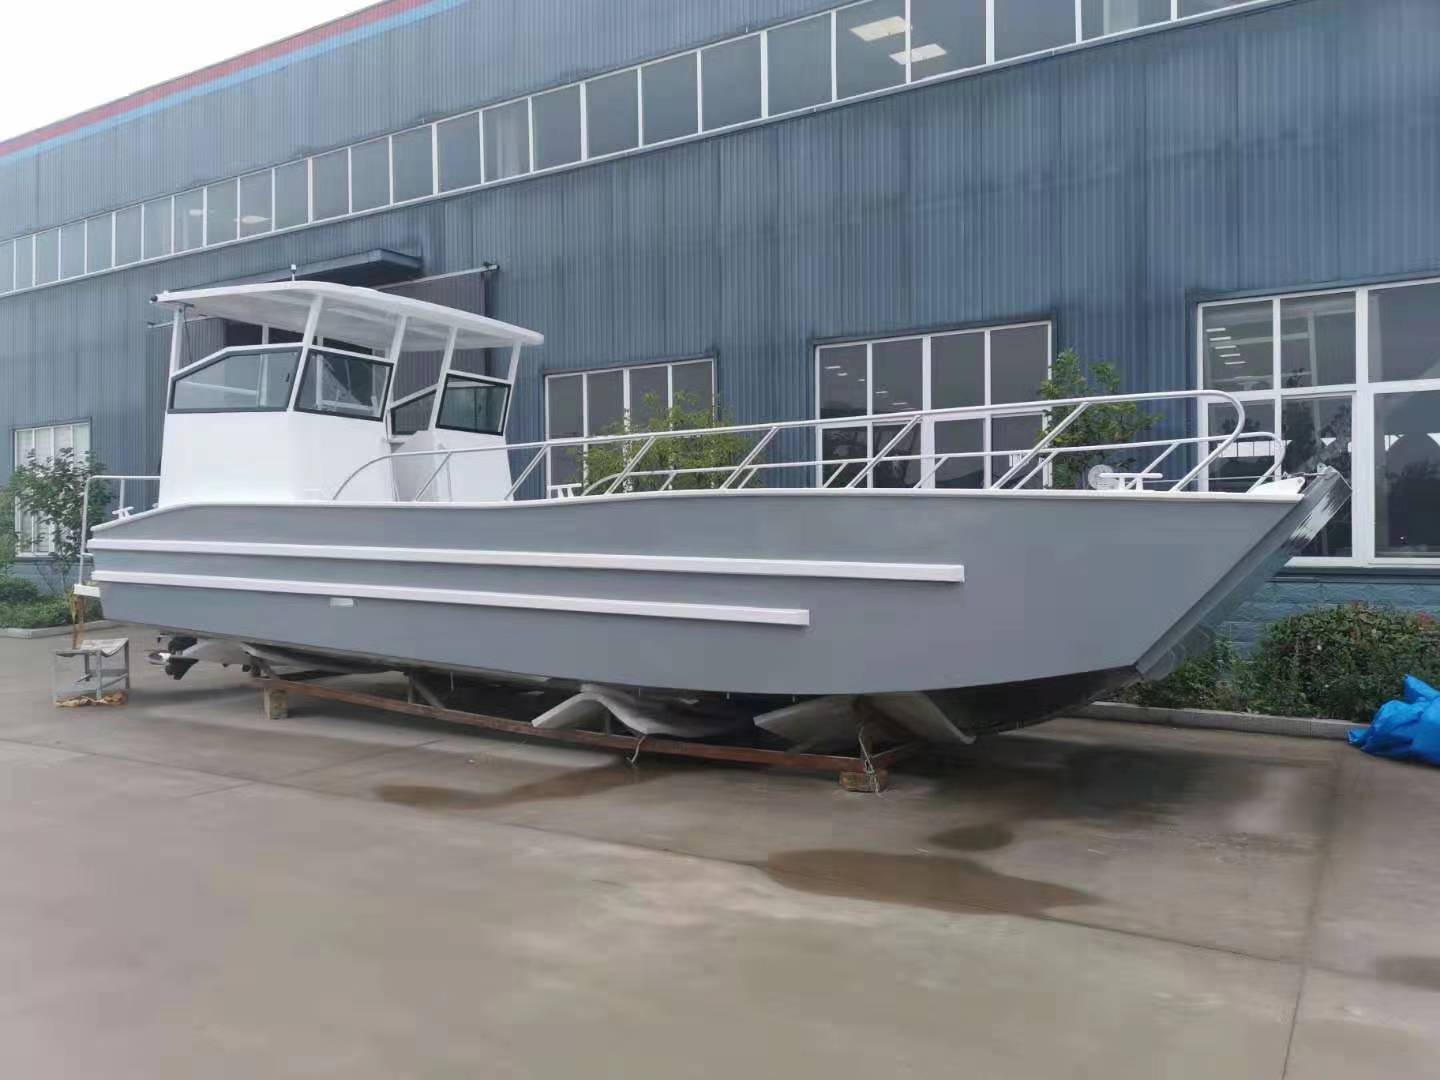 Comfort Cabin of 10m Aluminum Reinforced Hull Landing Craft Can Carry 8 Tons of Cargo And Can Be Customized with Color Printed Logos Landing Craft Boat Cargo Boat